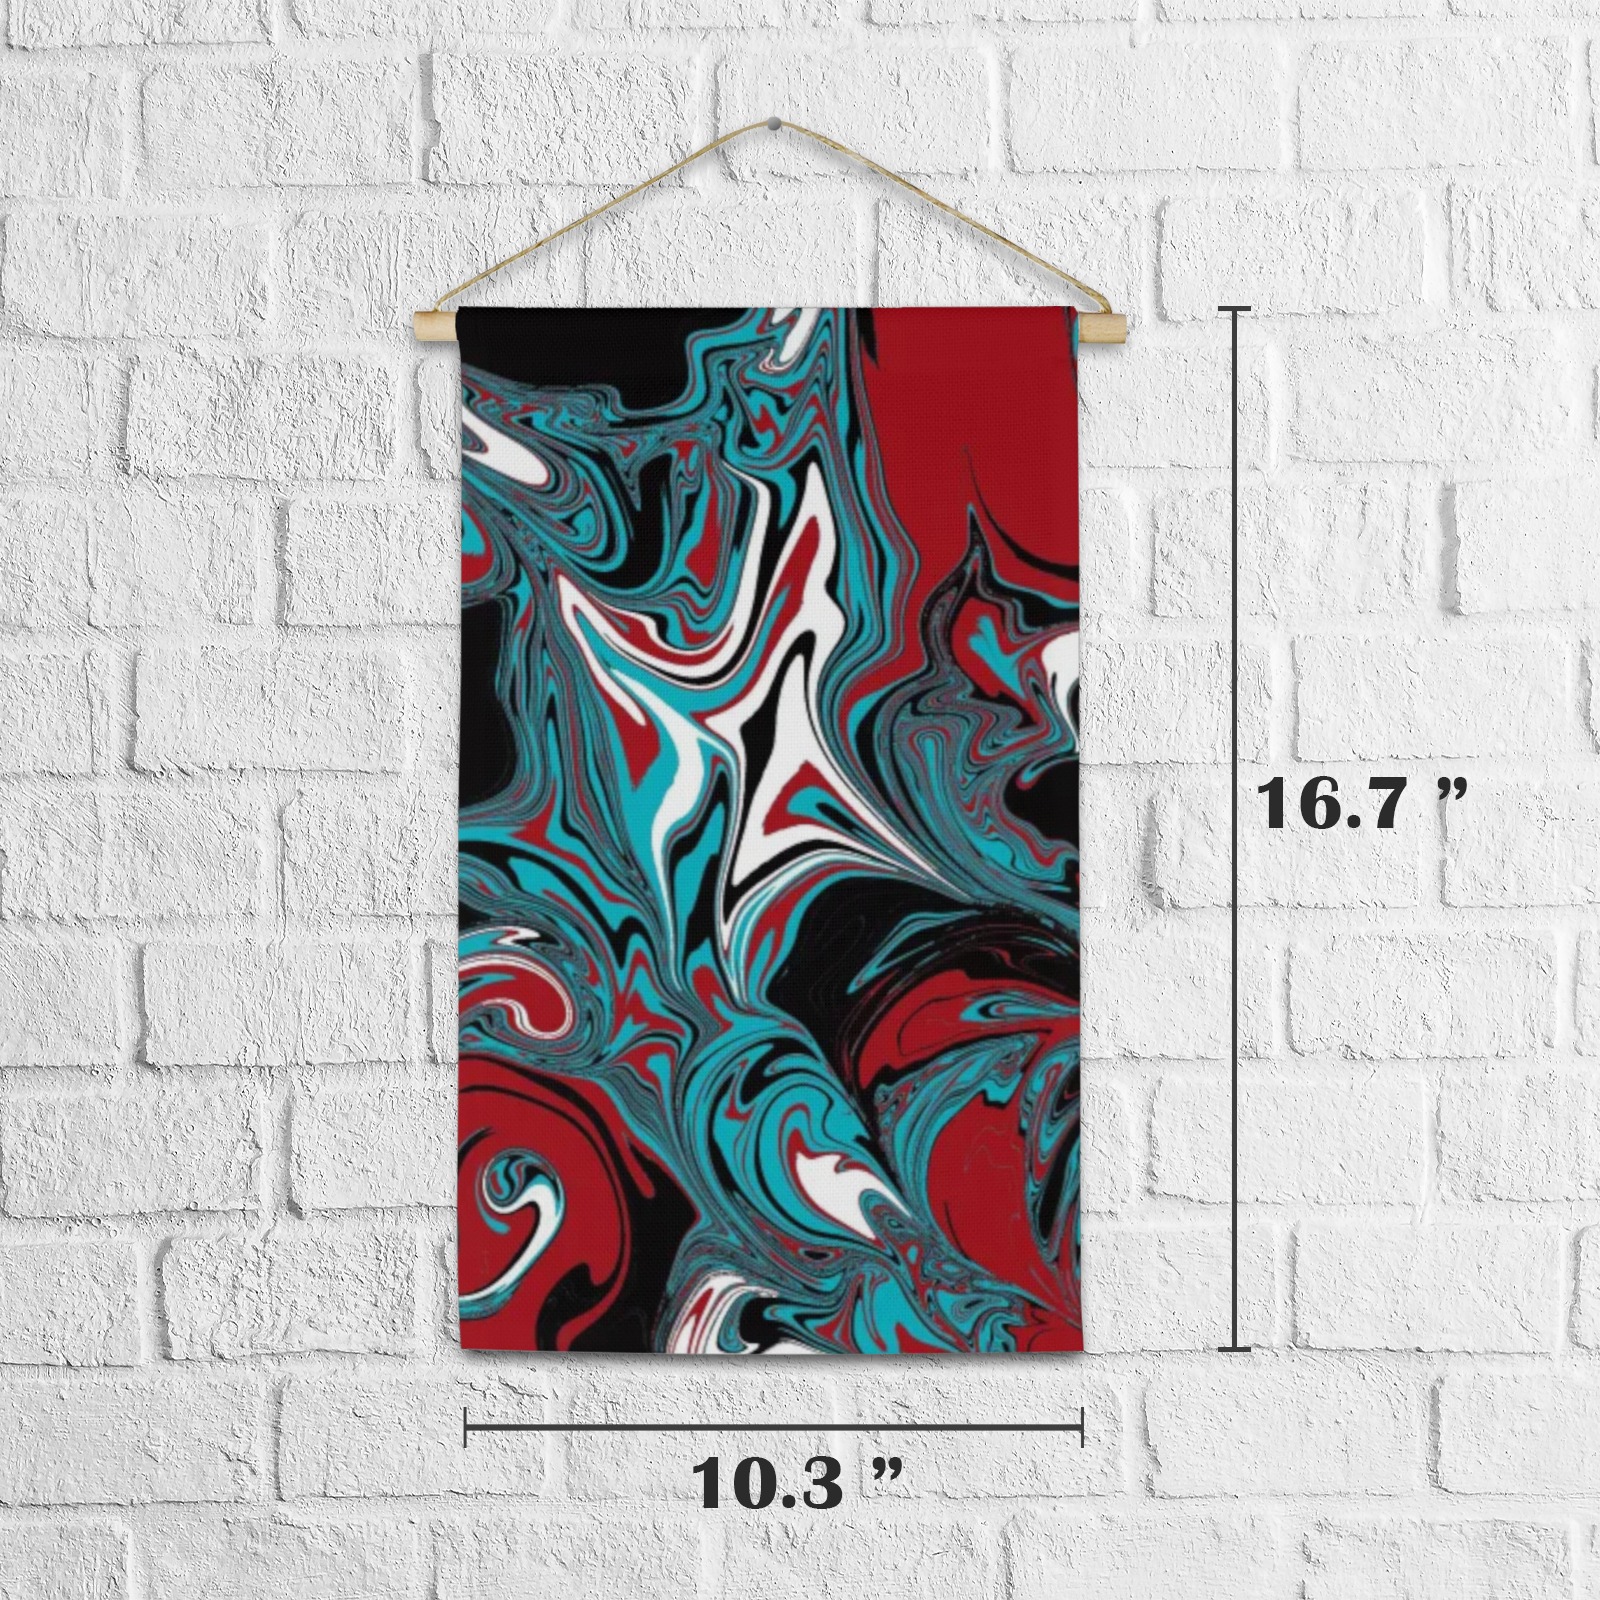 Dark Wave of Colors Linen Hanging Poster (without Fringe)